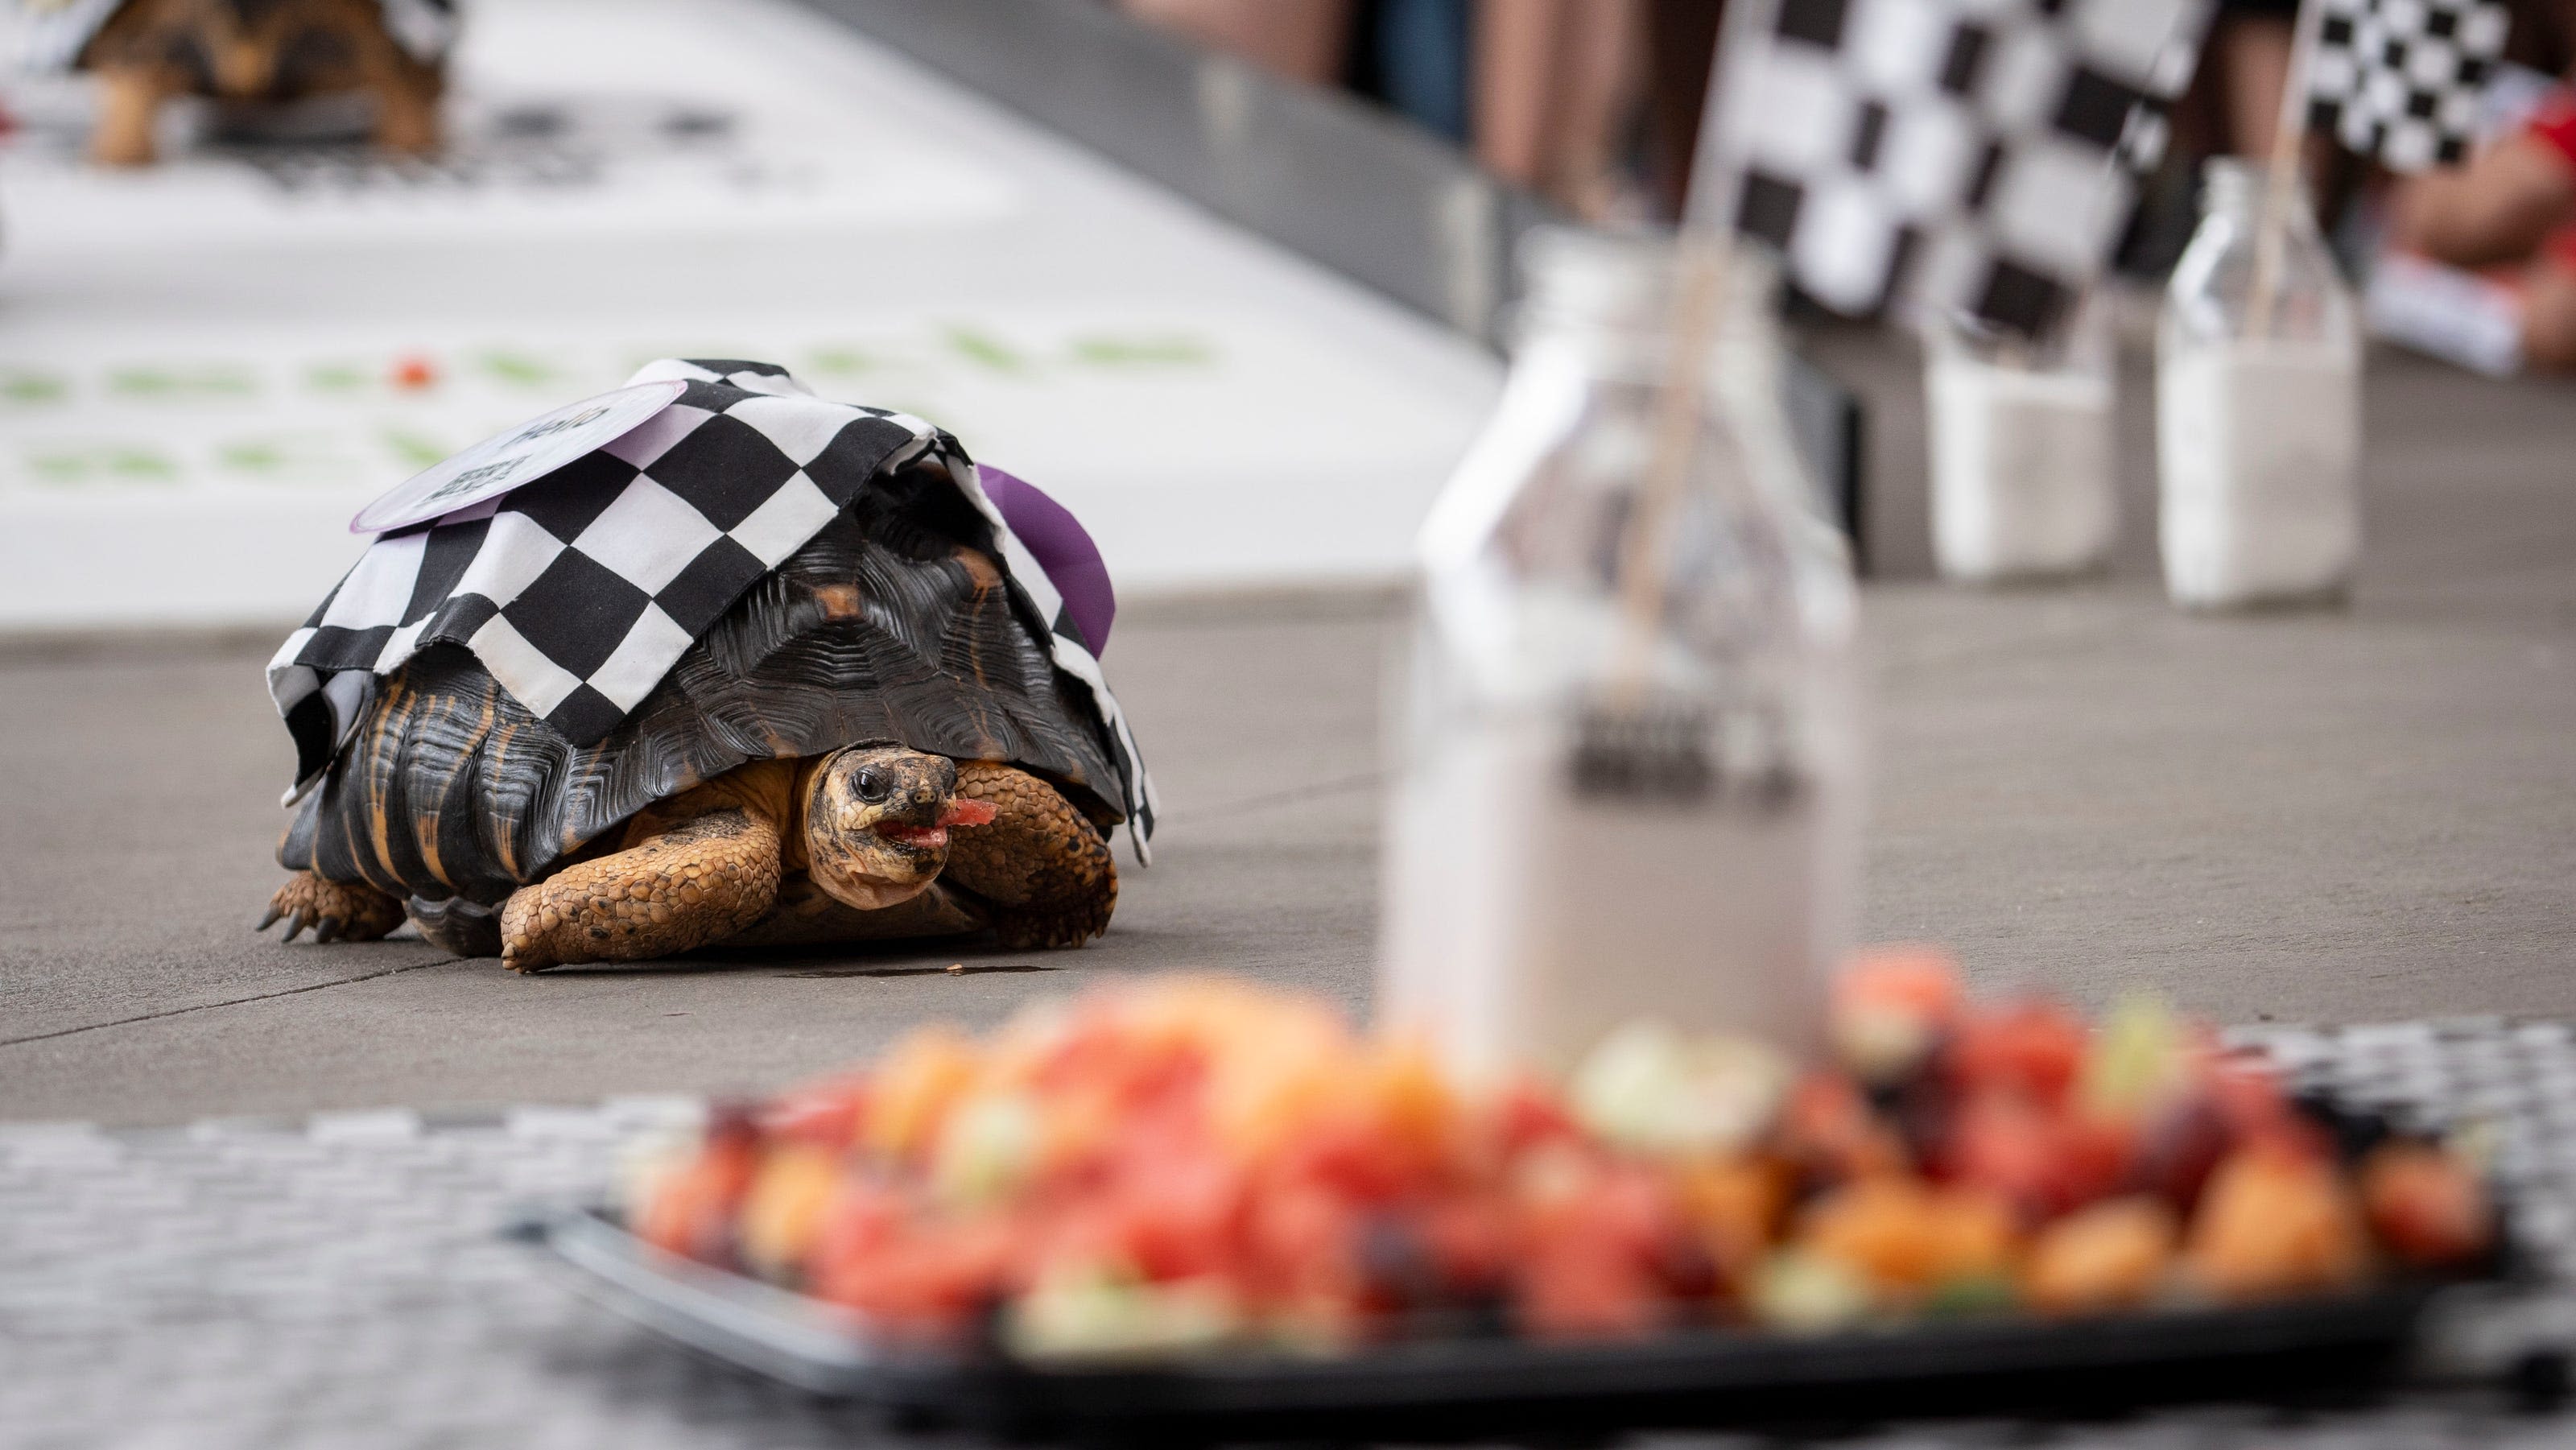 Tortoise Helio takes the win in the 45th Zoopolis 500